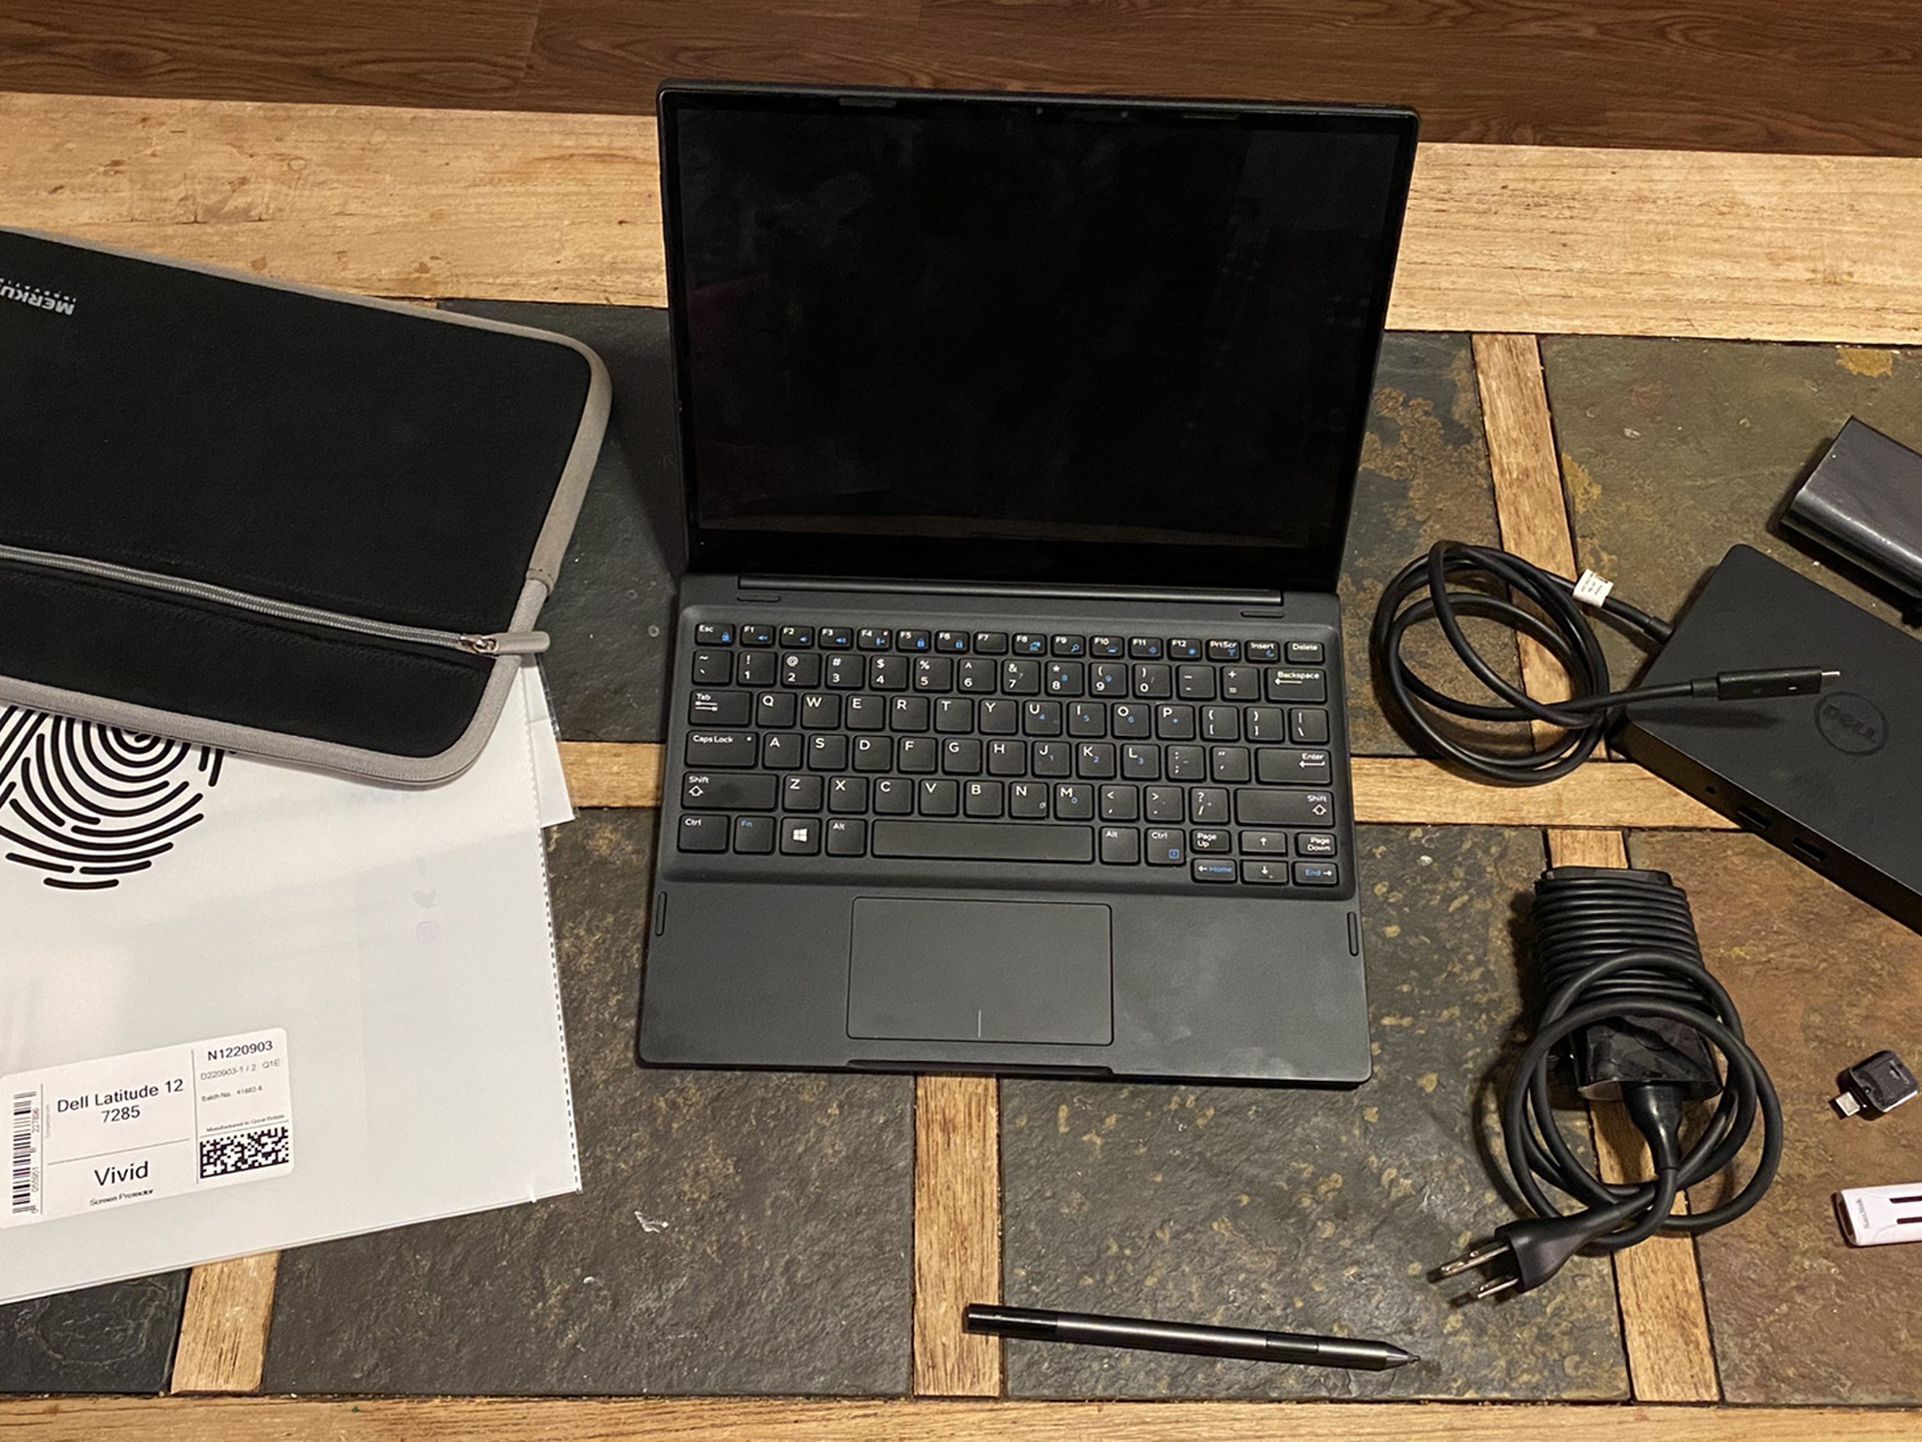 Dell Latitude 7285 2-in1 great condition with accessories